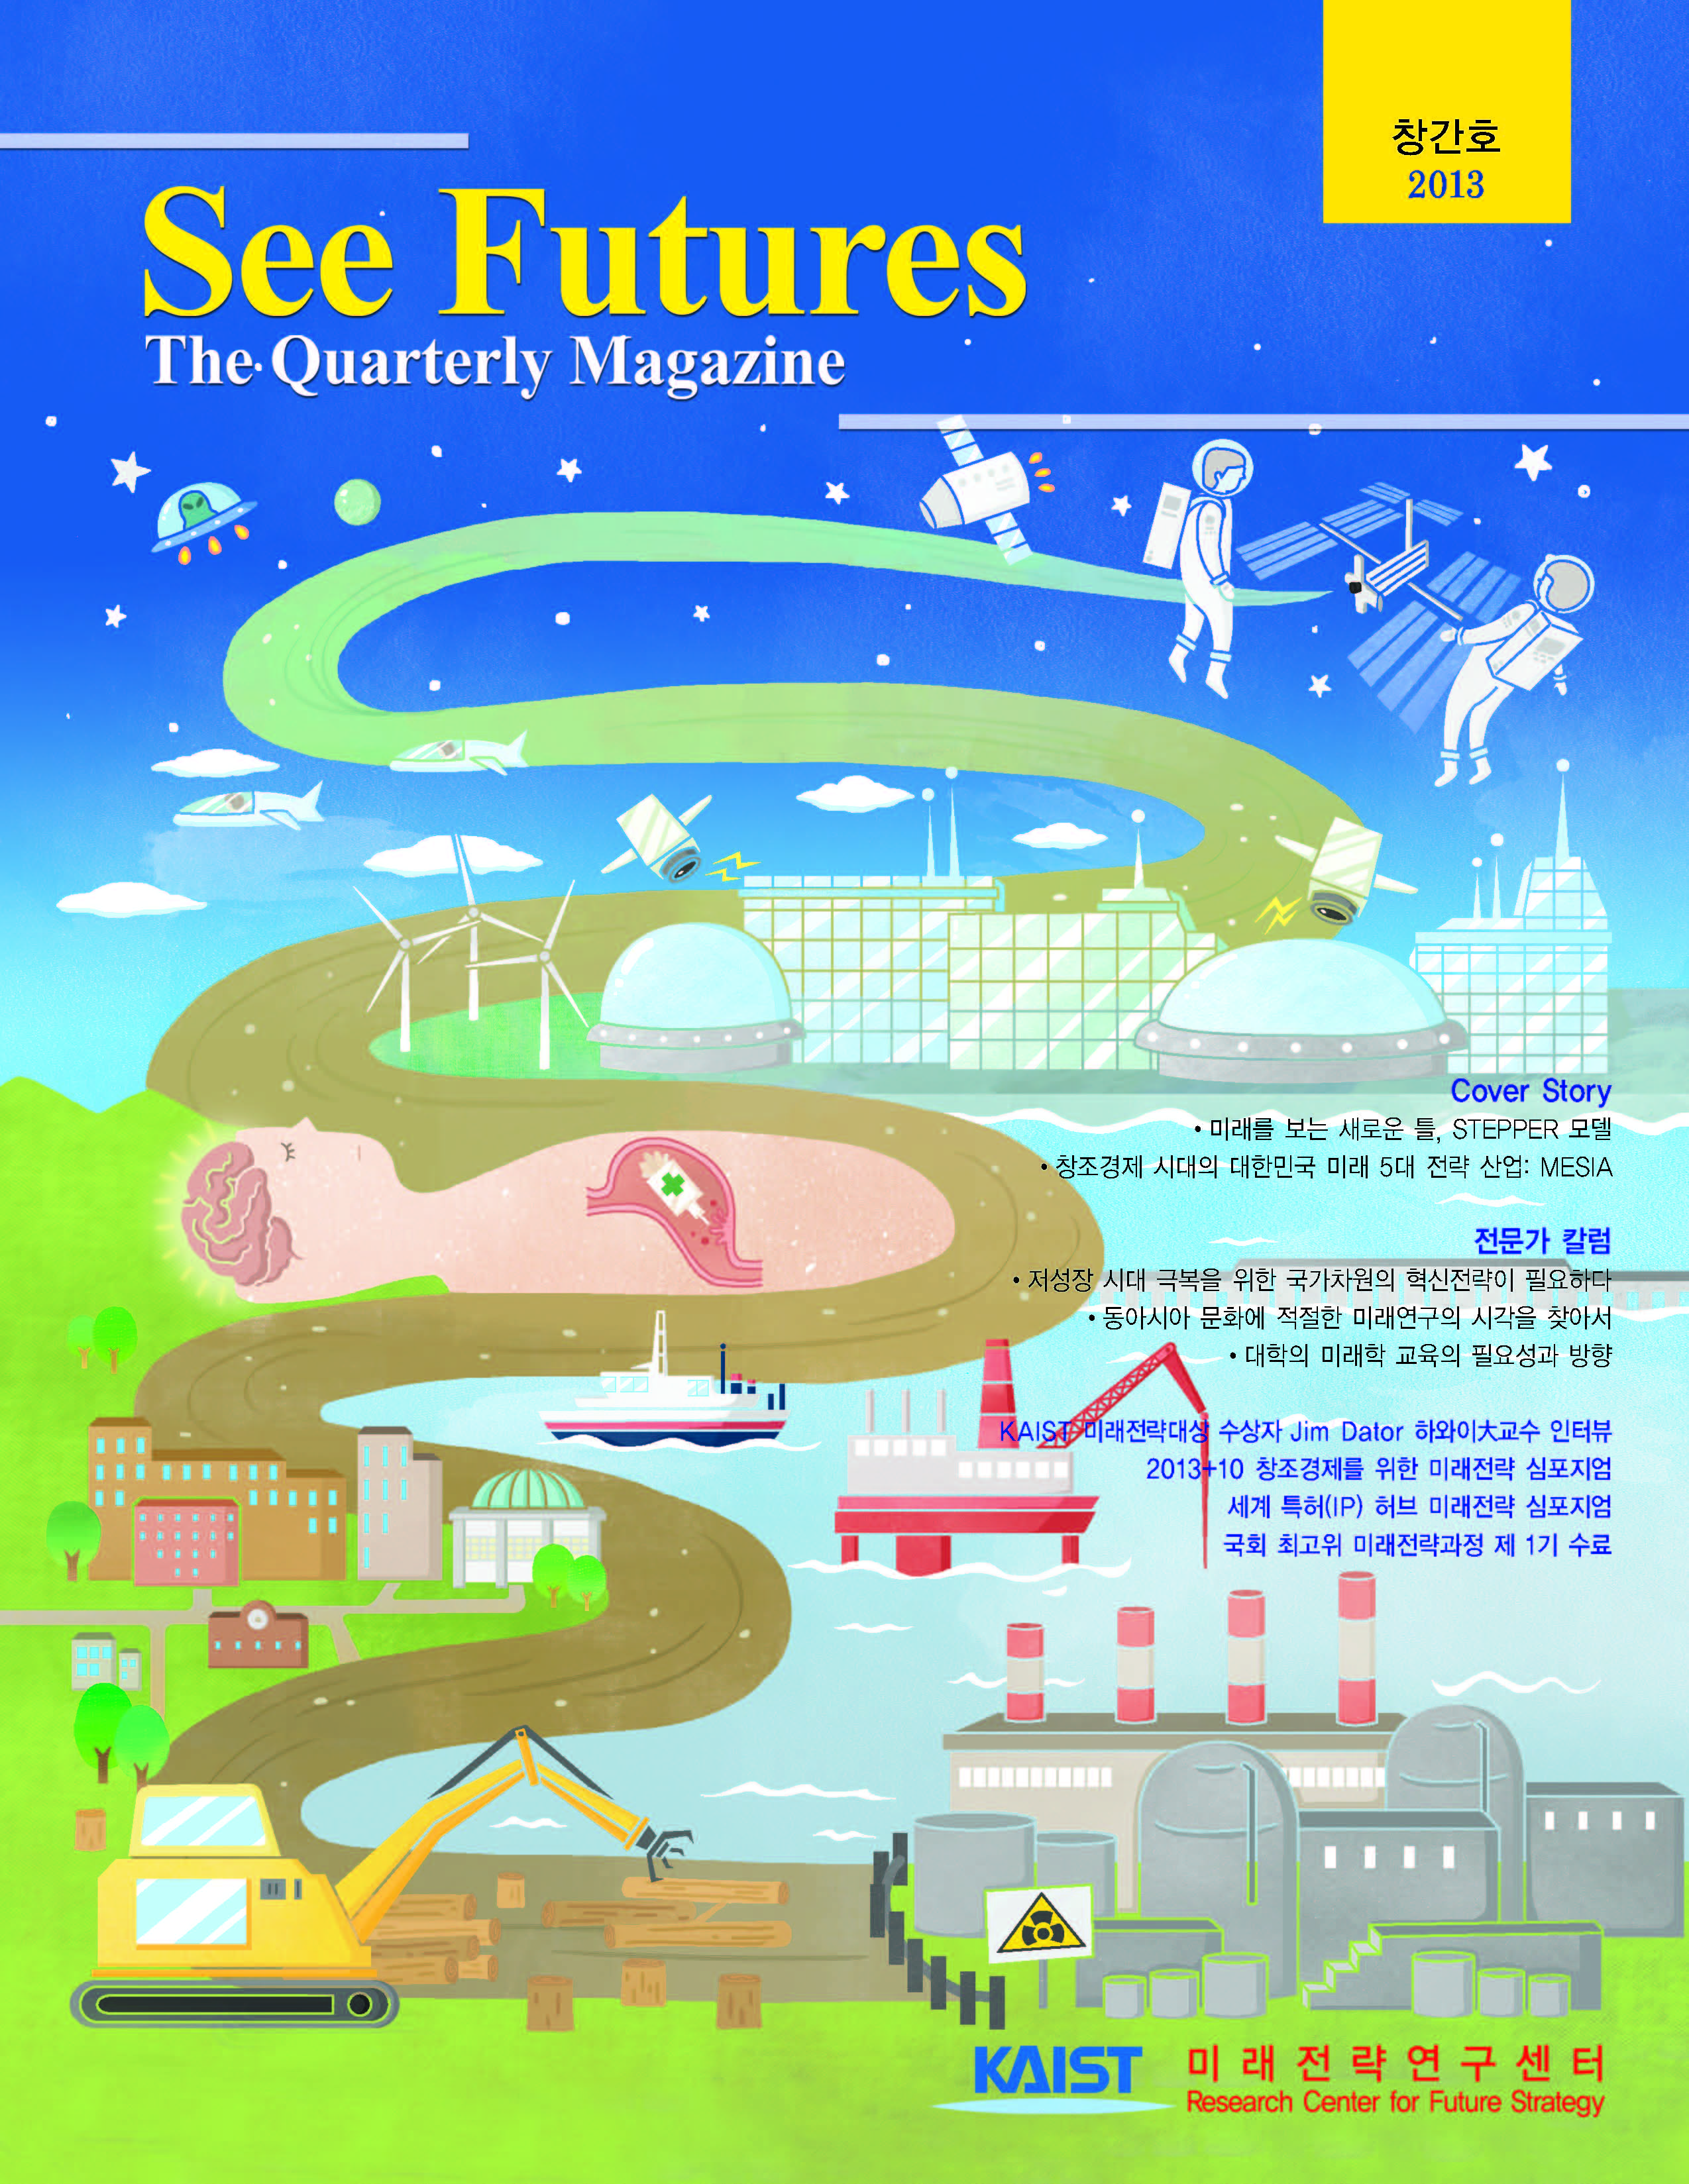 See Futures Winter 2013 (창간호)